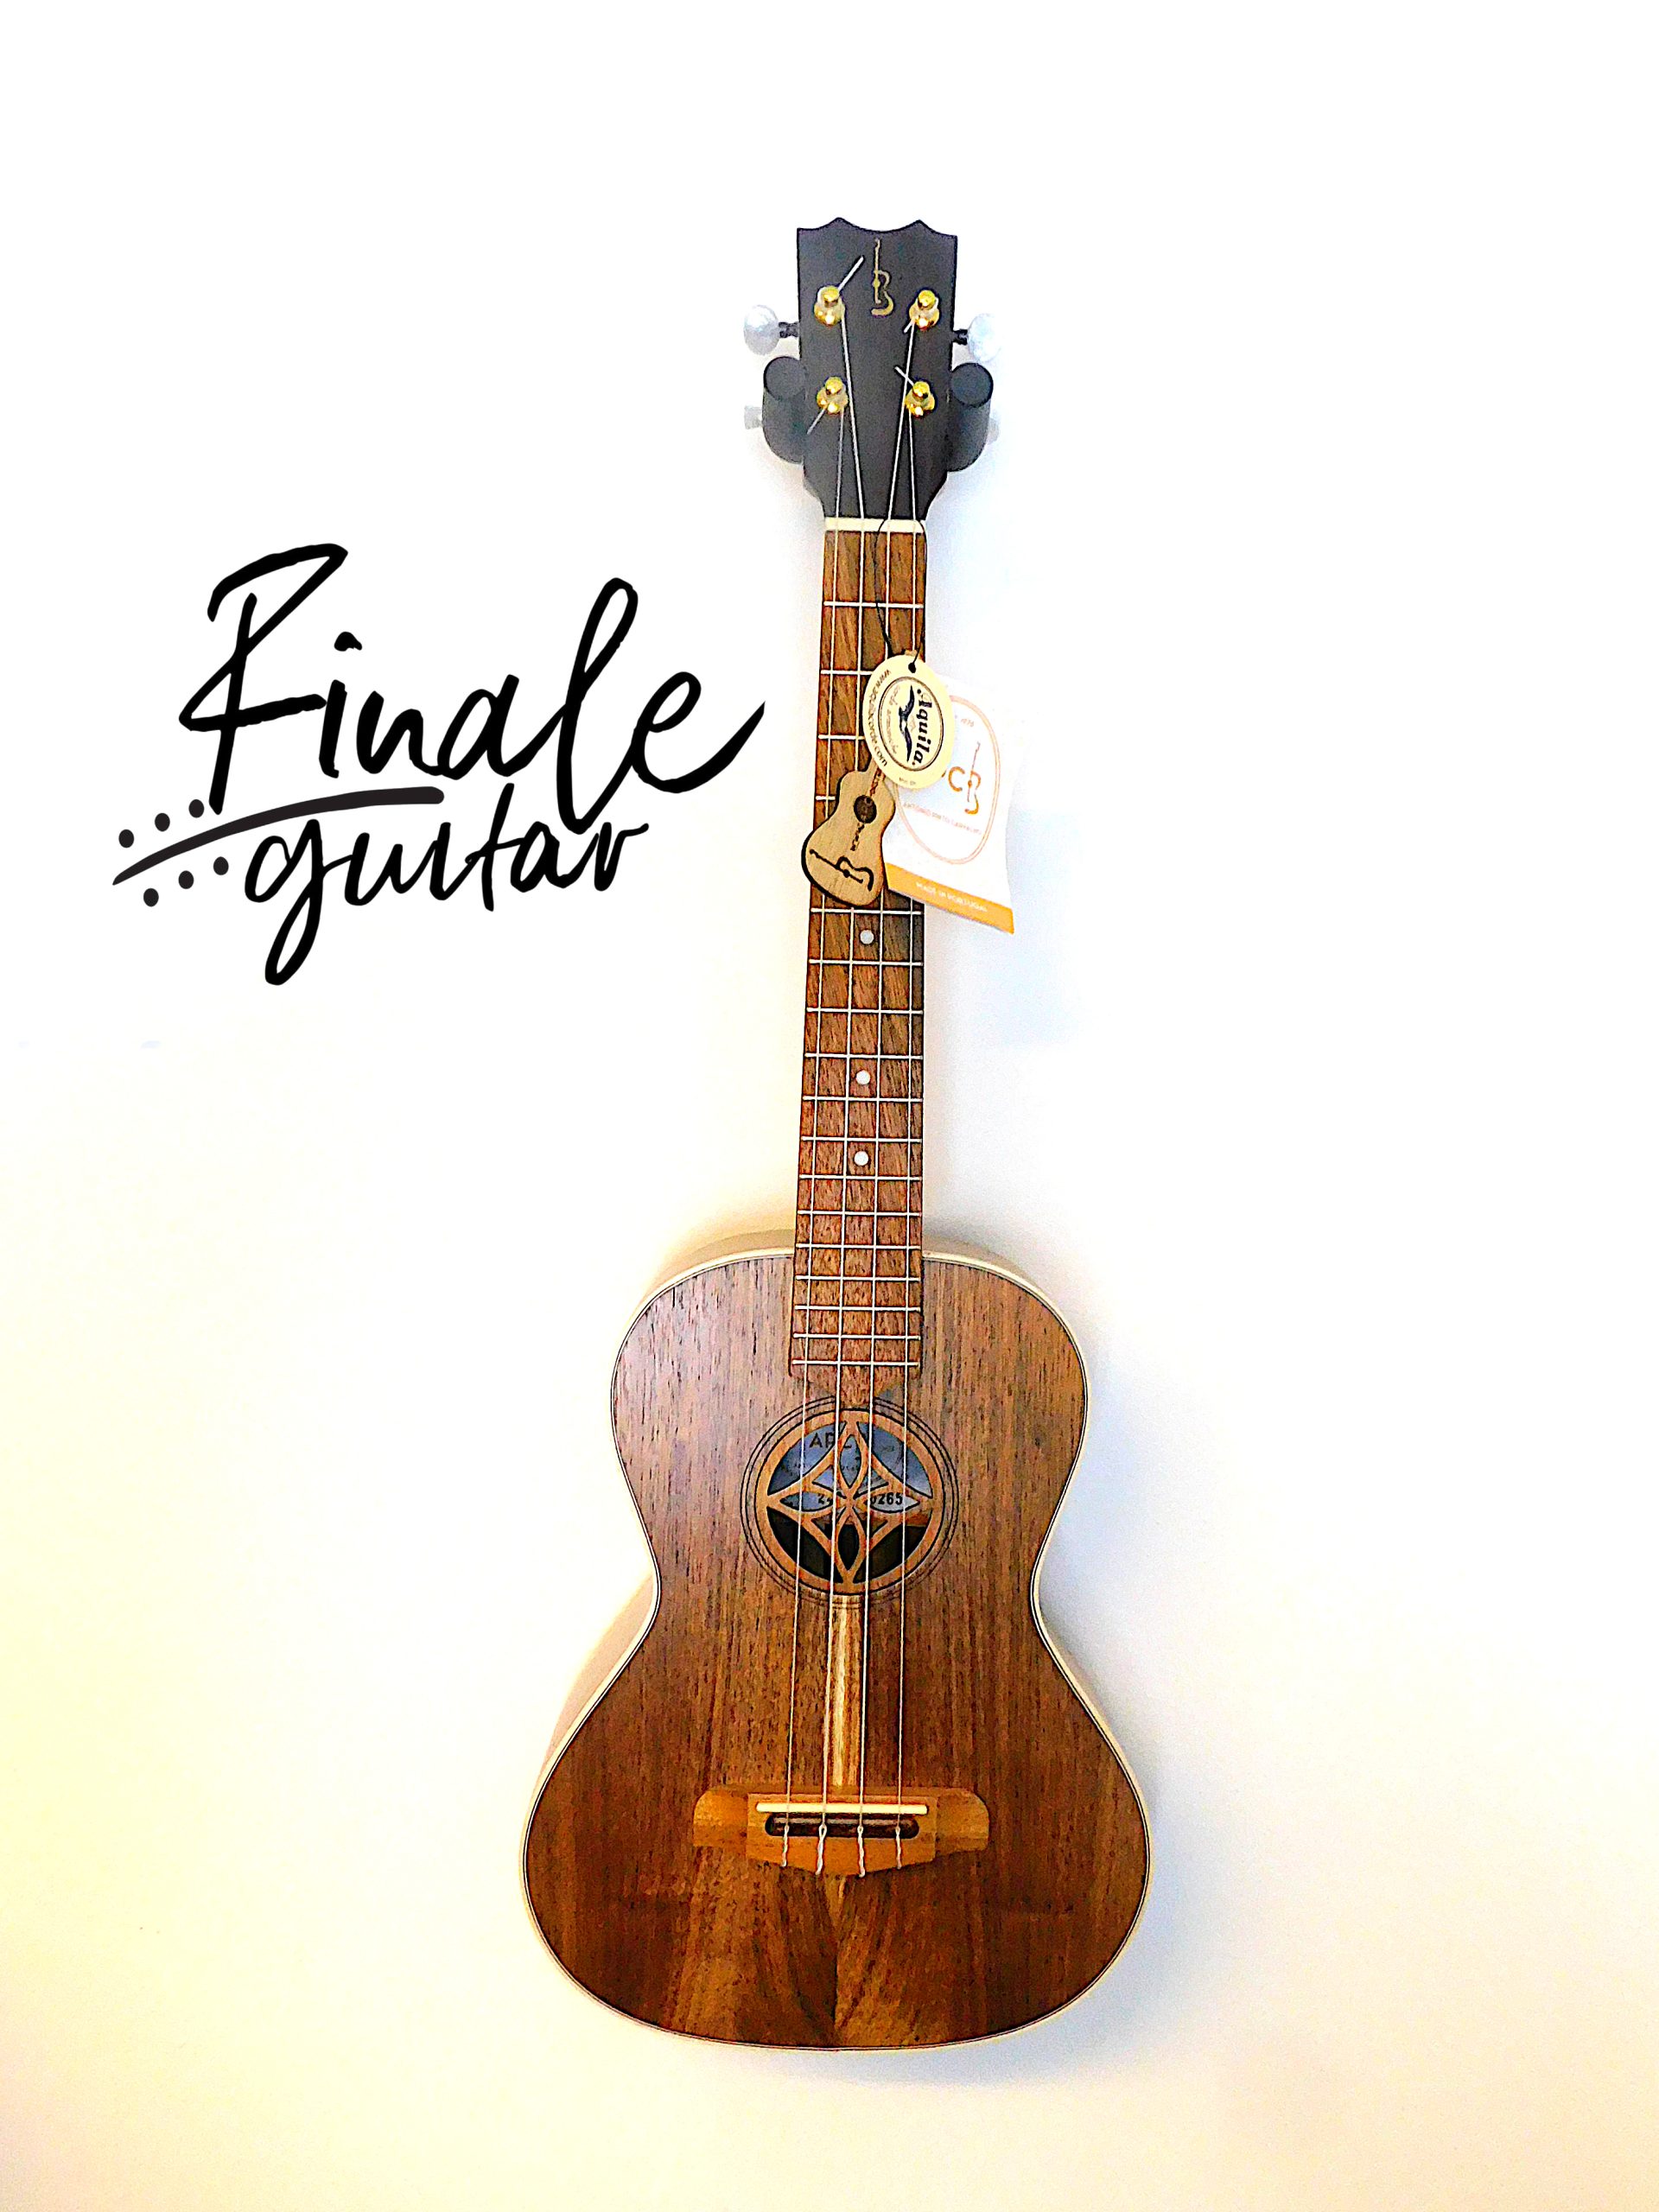 APC T ROS Ukulele Tenor with soundhole decoration for sale in our Sheffield guitar shop, Finale Guitar